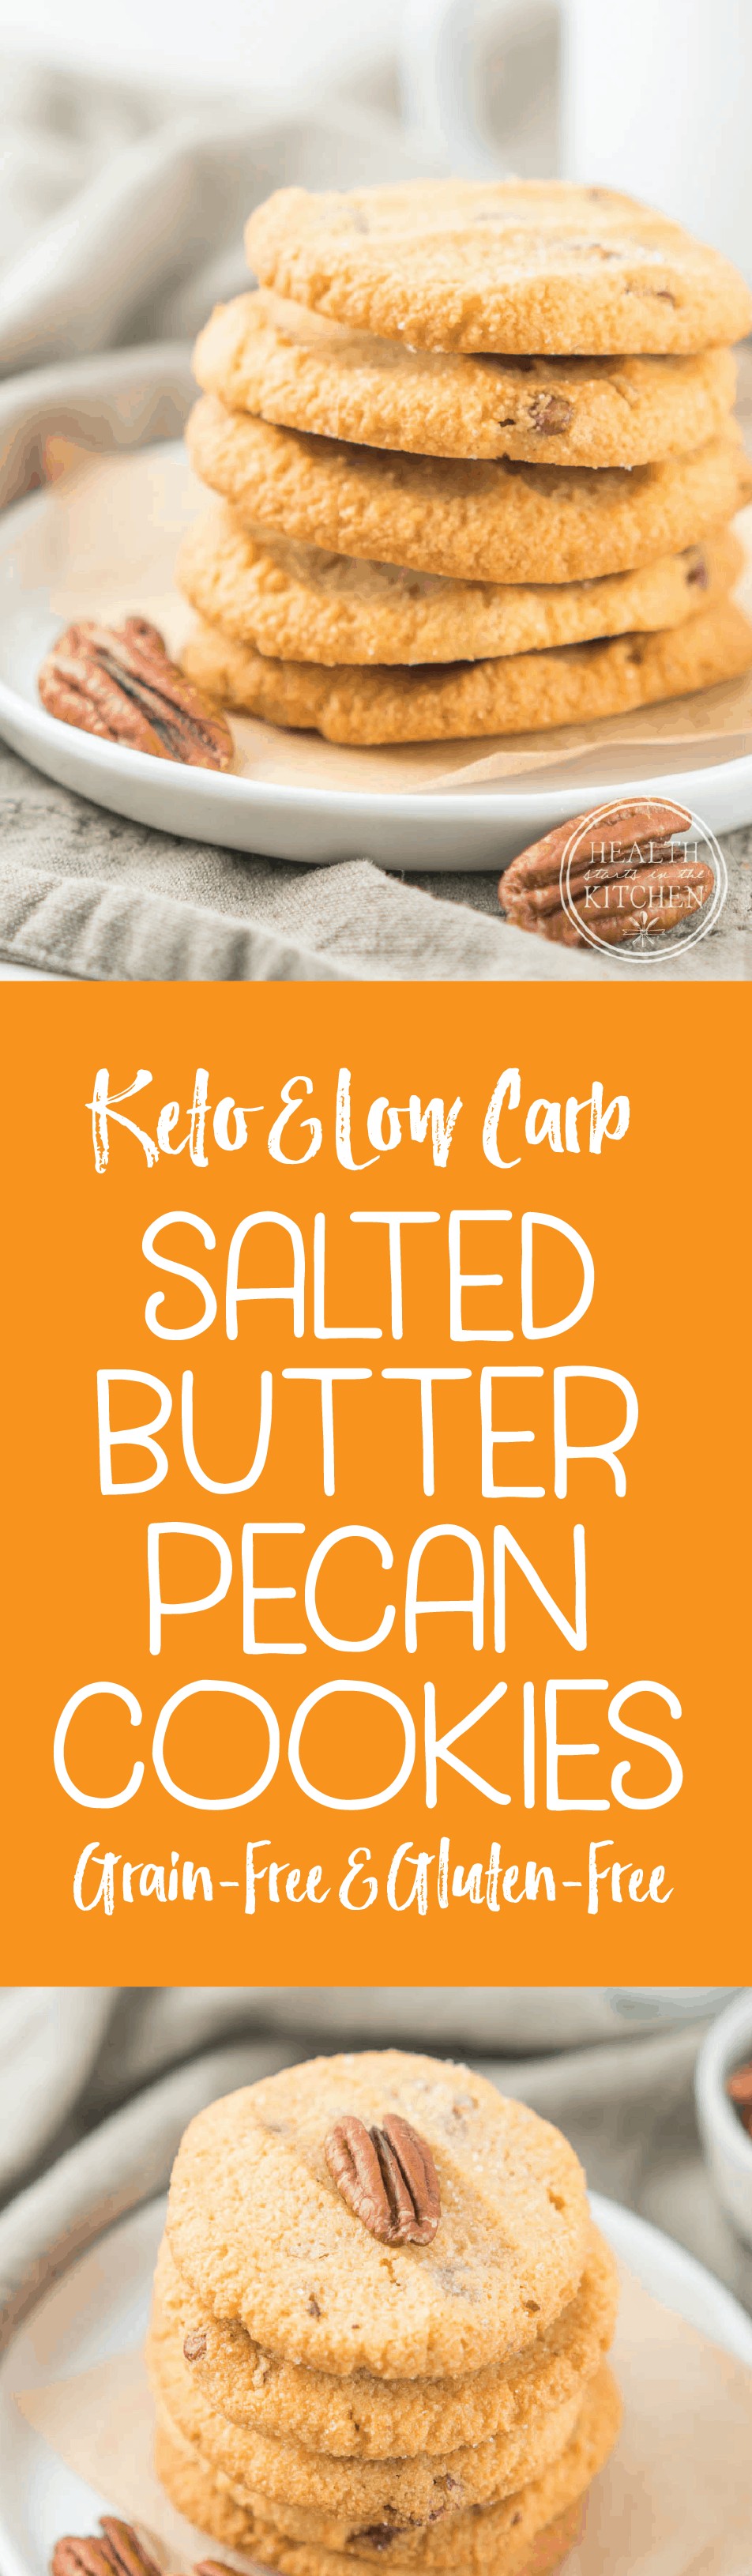 Low-Carb Keto Salted Butter Pecan Cookies {Grain-Free & Gluten-Free}